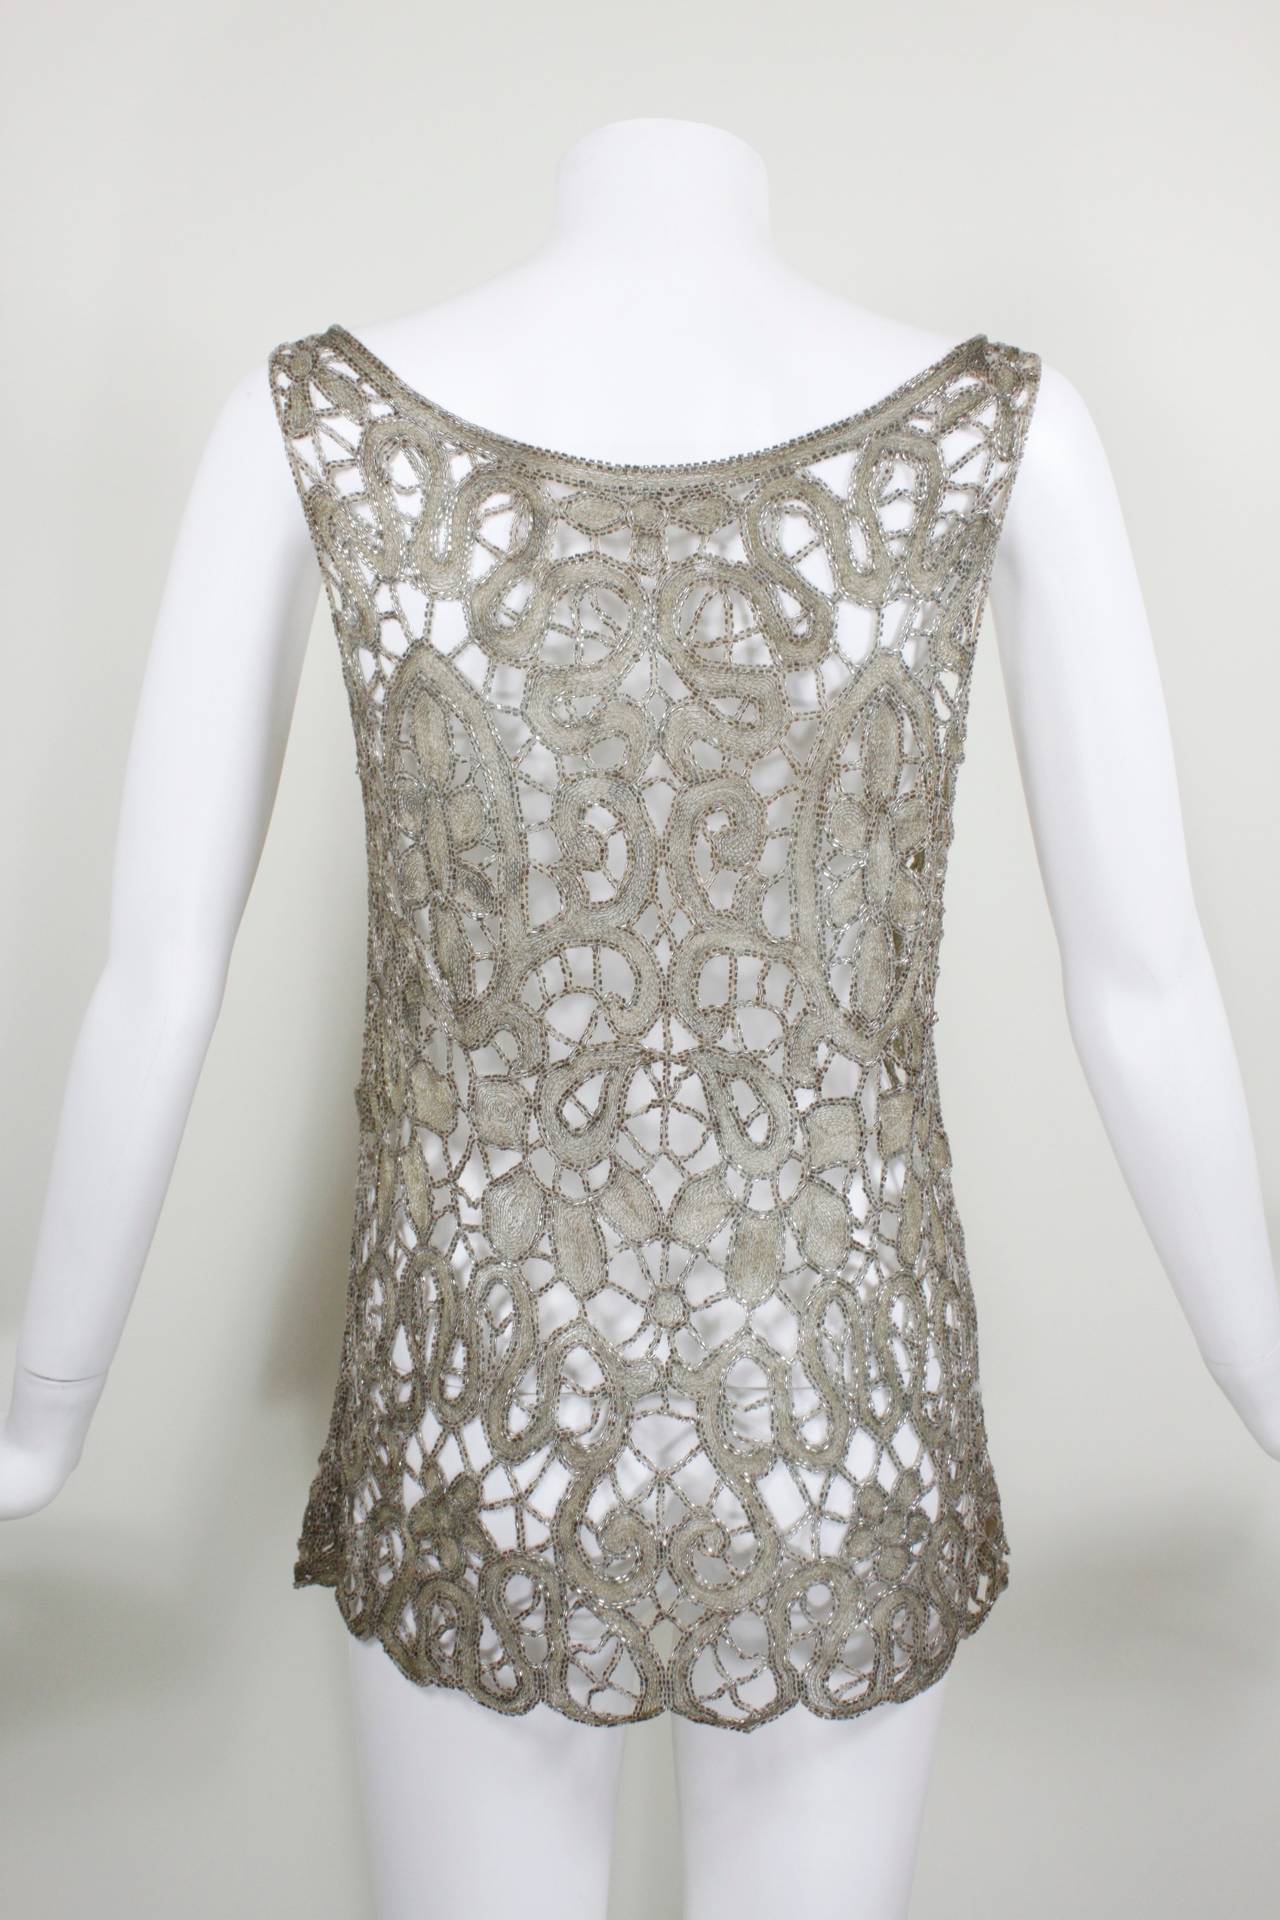 1920s Lace Cutout Blouse with Gold Lamé Embroidery and Beading For Sale 1